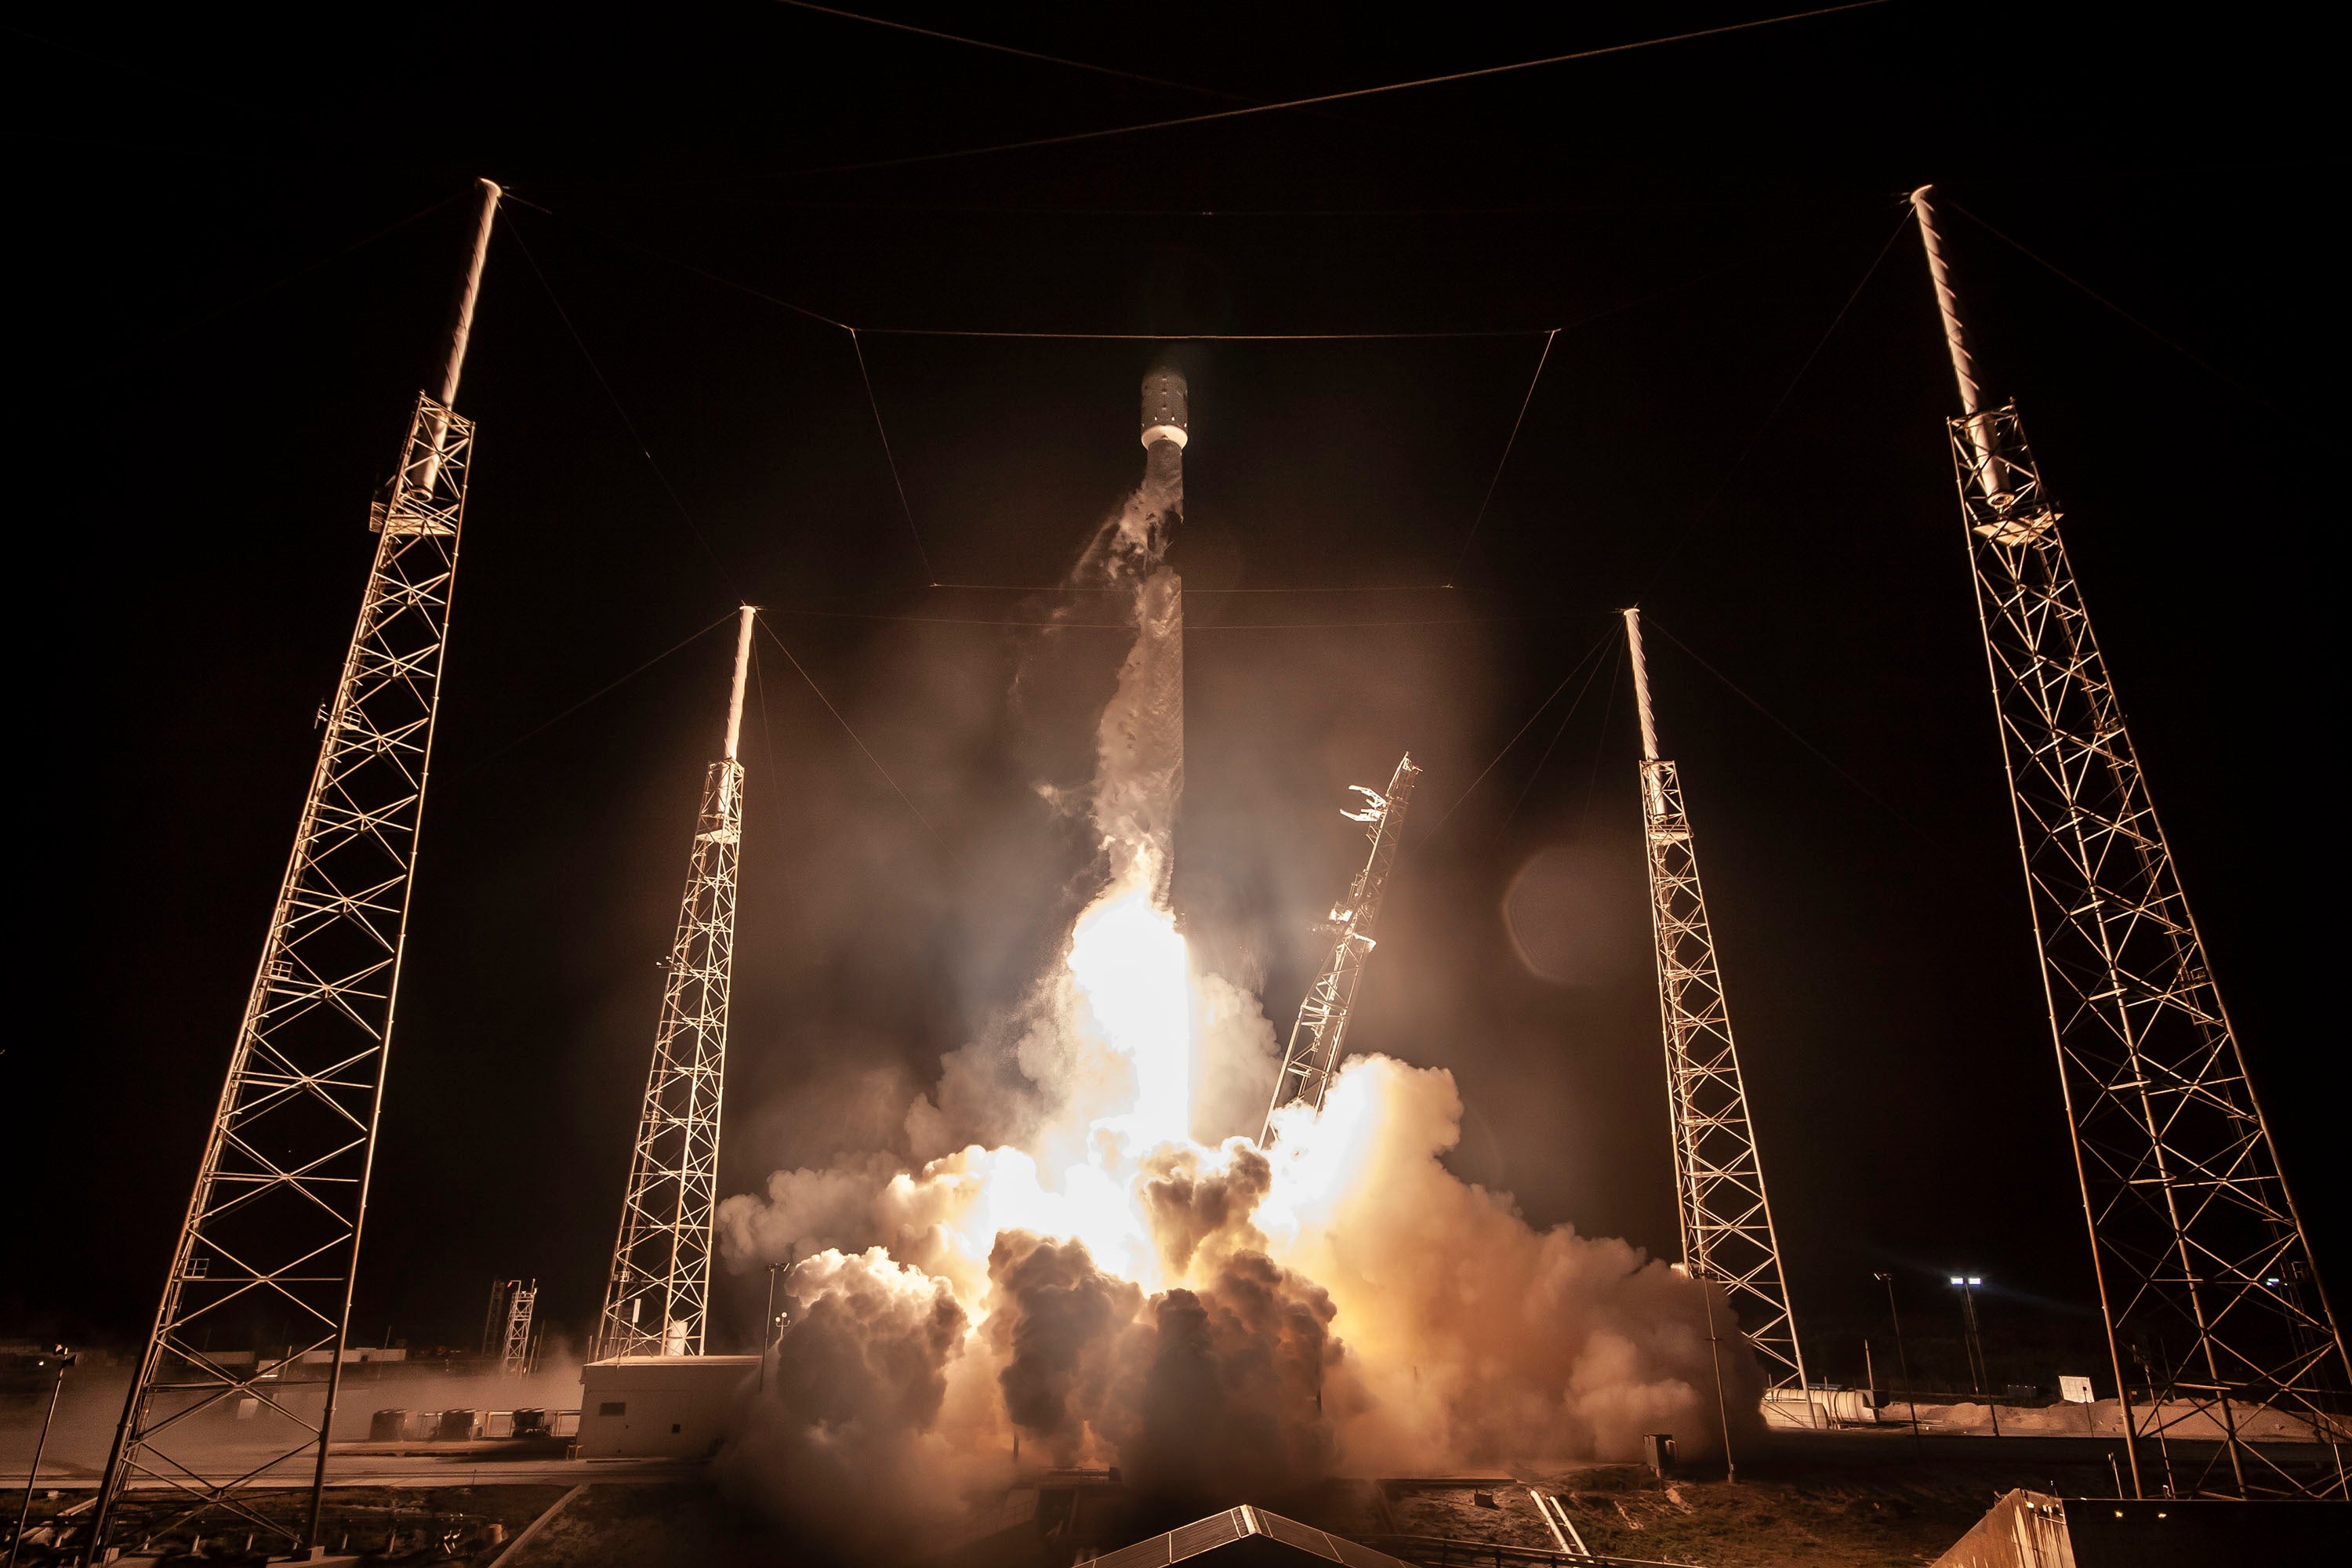 SpaceX will attempt to launch a previously flown Falcon 9 rocket a fifth time during tomorrow's Starlink mission -Watch It Live!